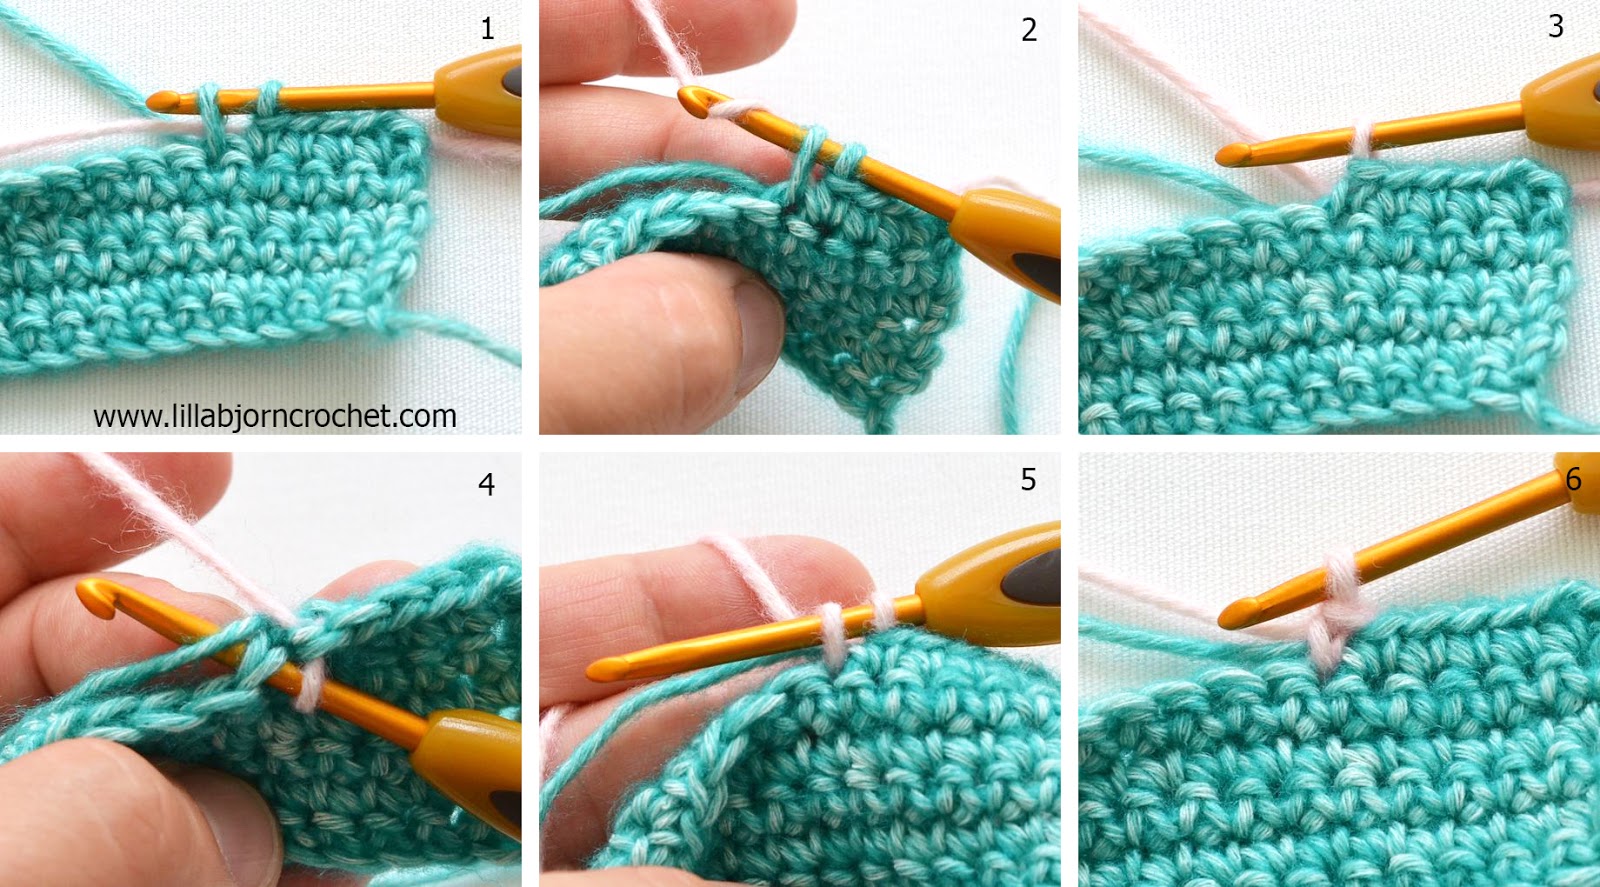 how to do tapestry crochet. detailed tutorial with step-by-step pictures. mqwyhdo